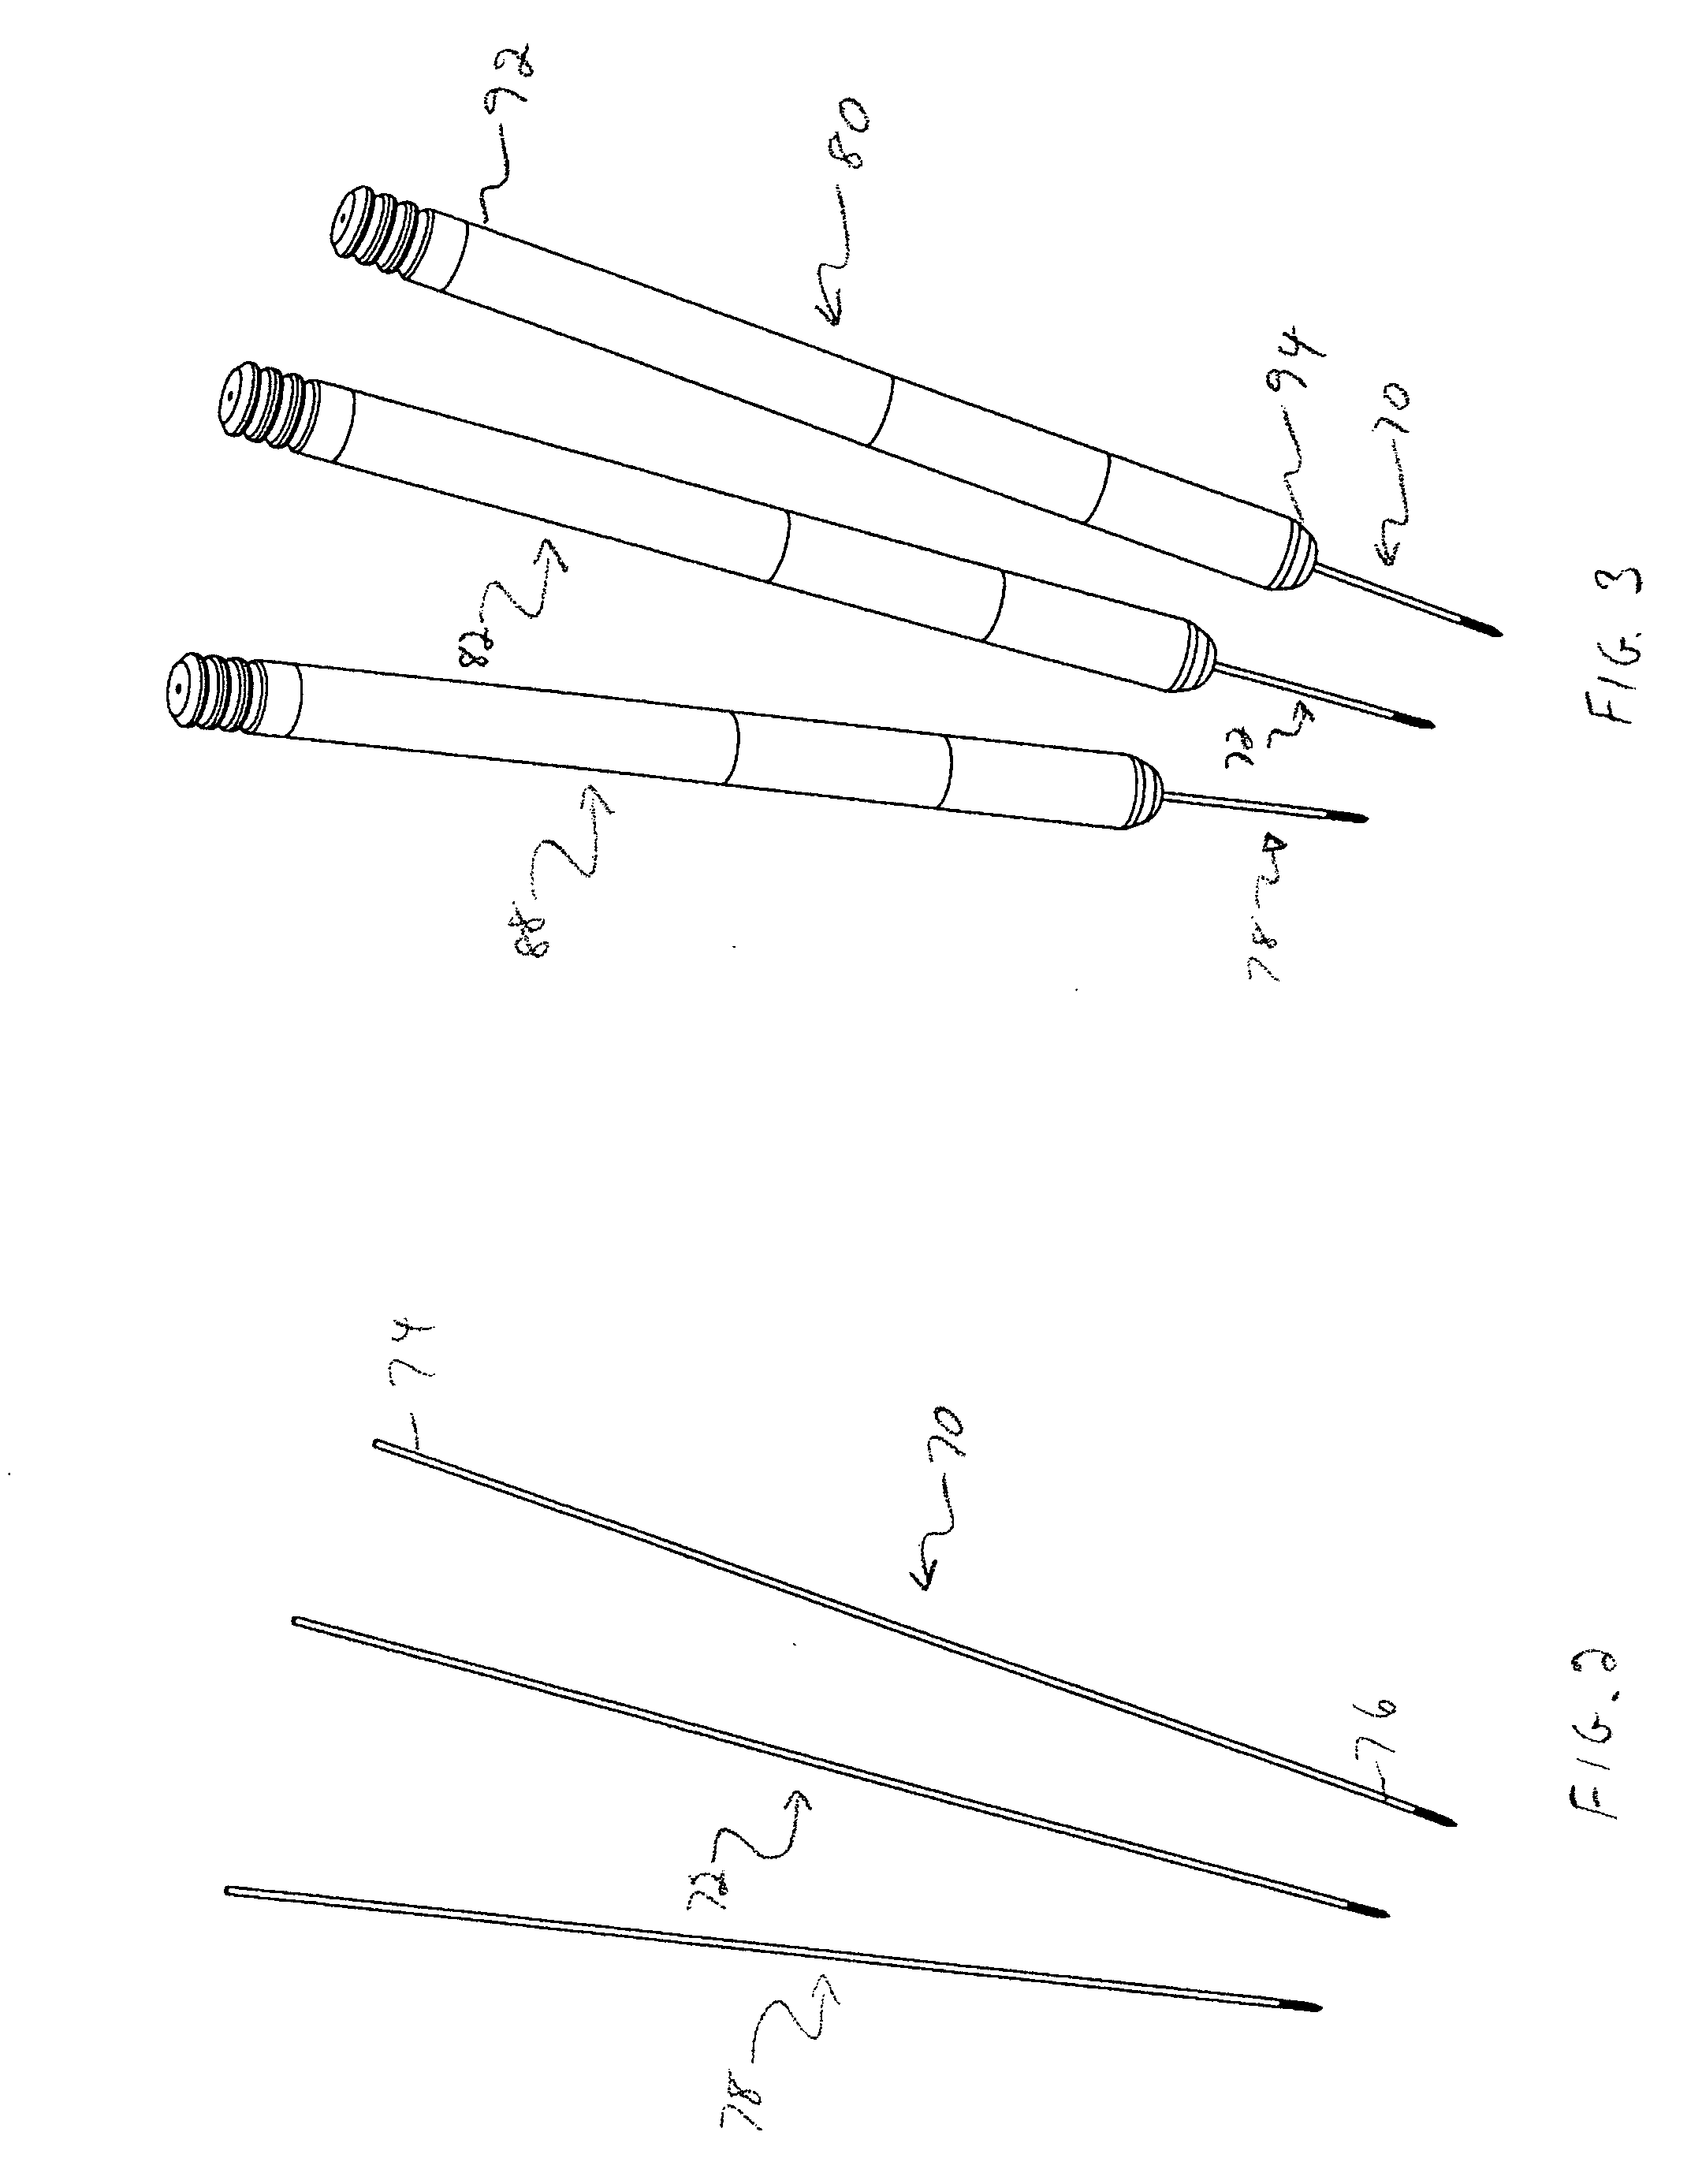 Rod contouring apparatus and method for percutaneous pedicle screw extension